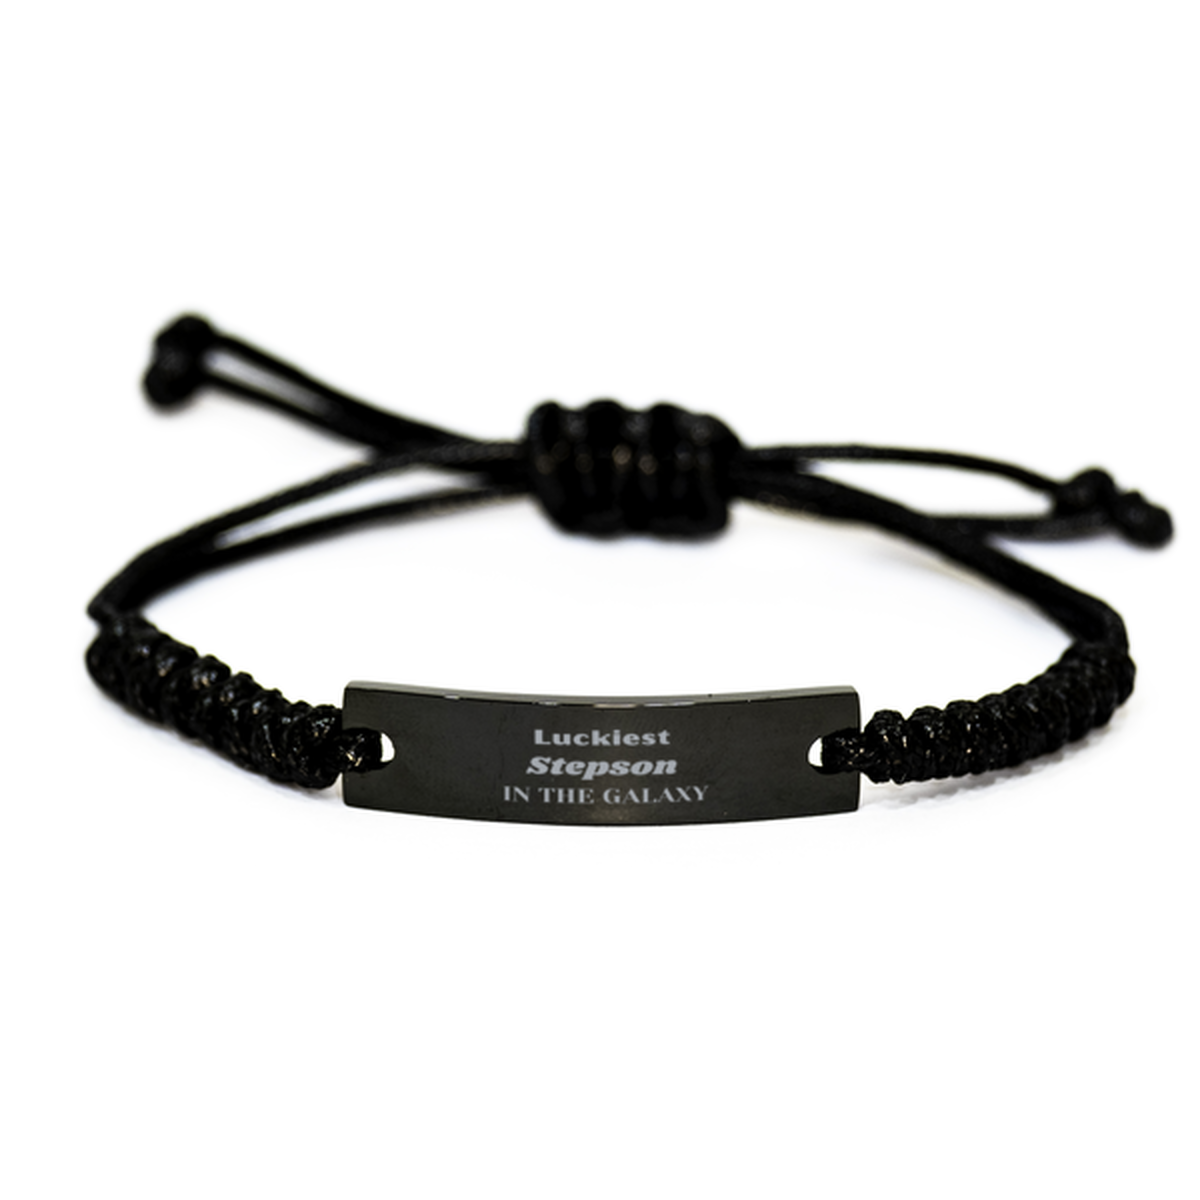 Luckiest Stepson in the Galaxy, To My Stepson Engraved Gifts, Christmas Stepson Black Rope Bracelet Gifts, X-mas Birthday Unique Gifts For Stepson Men Women